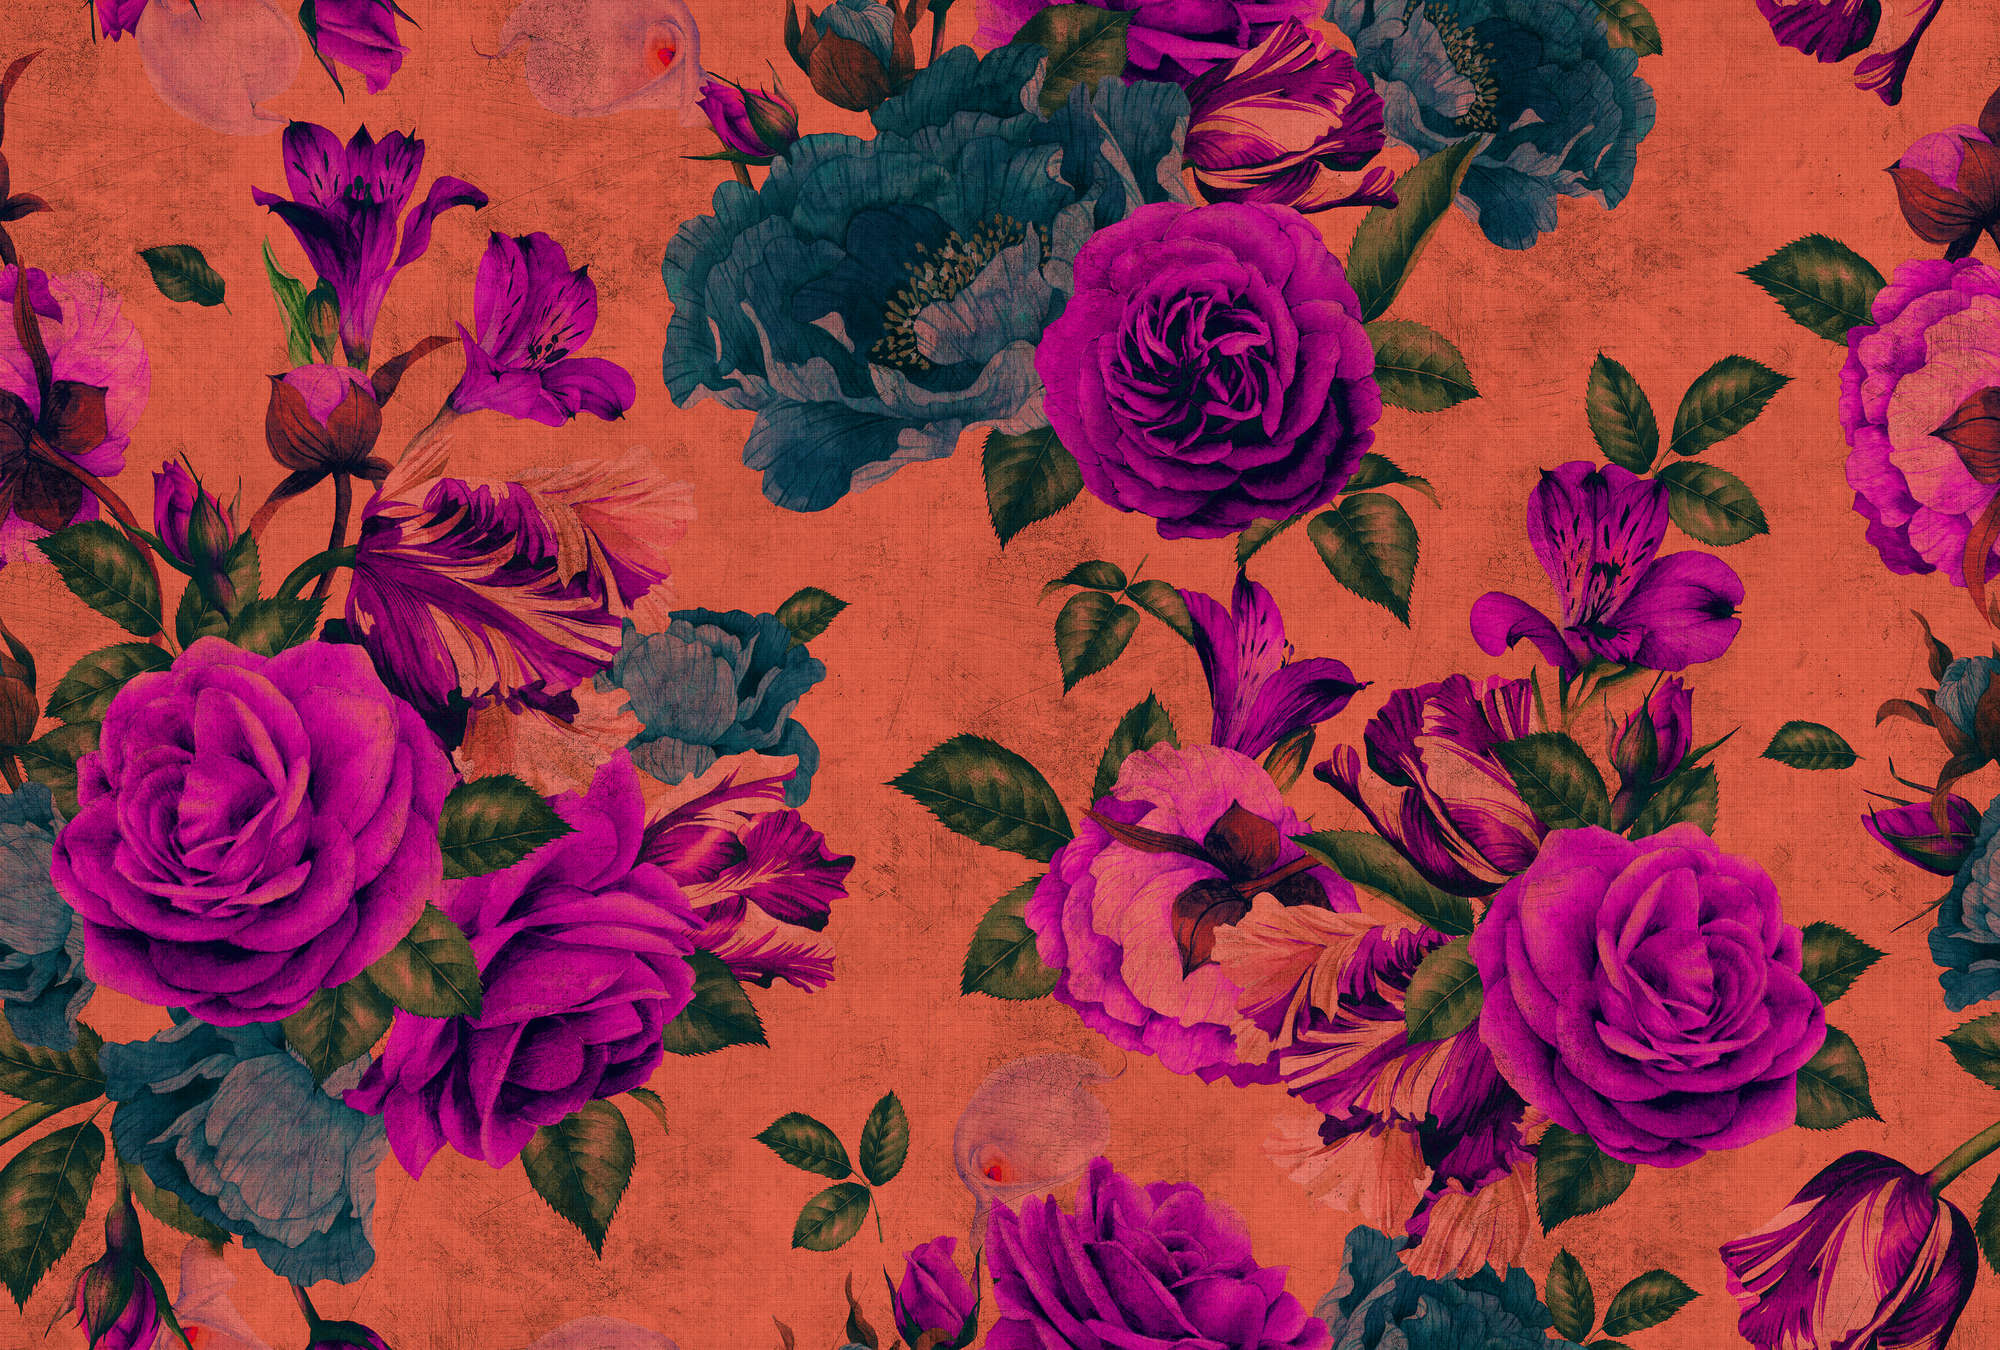             Spanish rose 2 - Rose petals wallpaper, natural structure with bright colours - orange, violet | structure non-woven
        